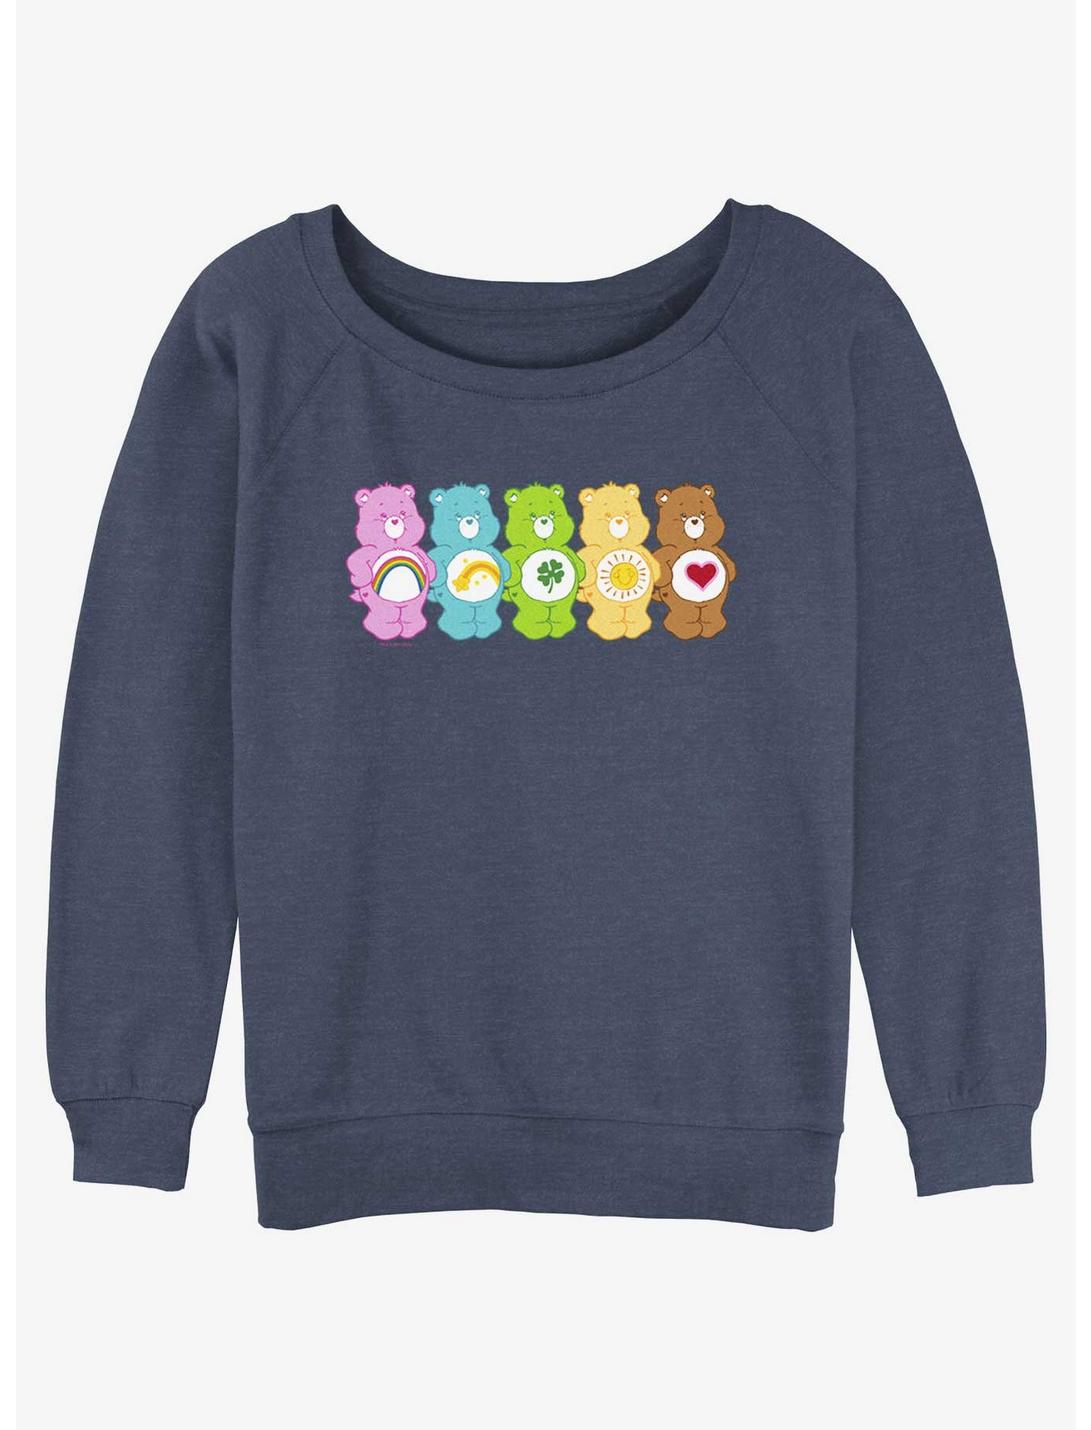 Care Bears All Together Womens Slouchy Sweatshirt, BLUEHTR, hi-res